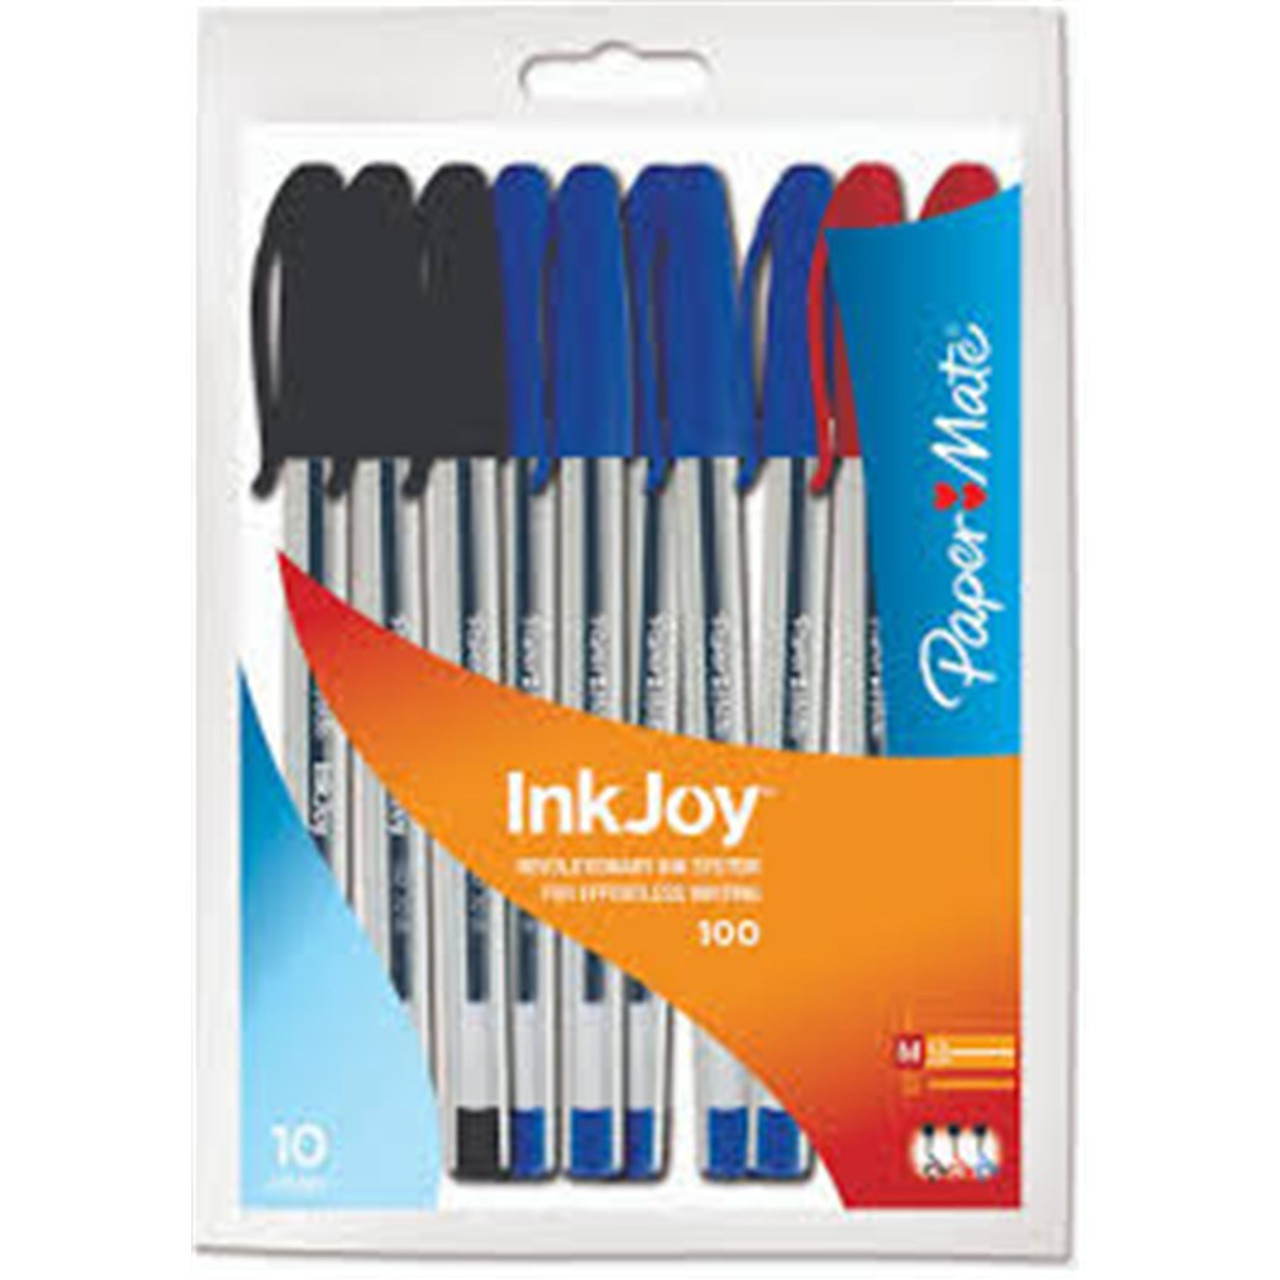 PAPERMATE INKJOY 100 BALLPOINT PEN 1.0MM ASSORTED COLOURS 120 PENS (12  PACKS OF 10 ASSORTED) - Melbourne Office Supplies